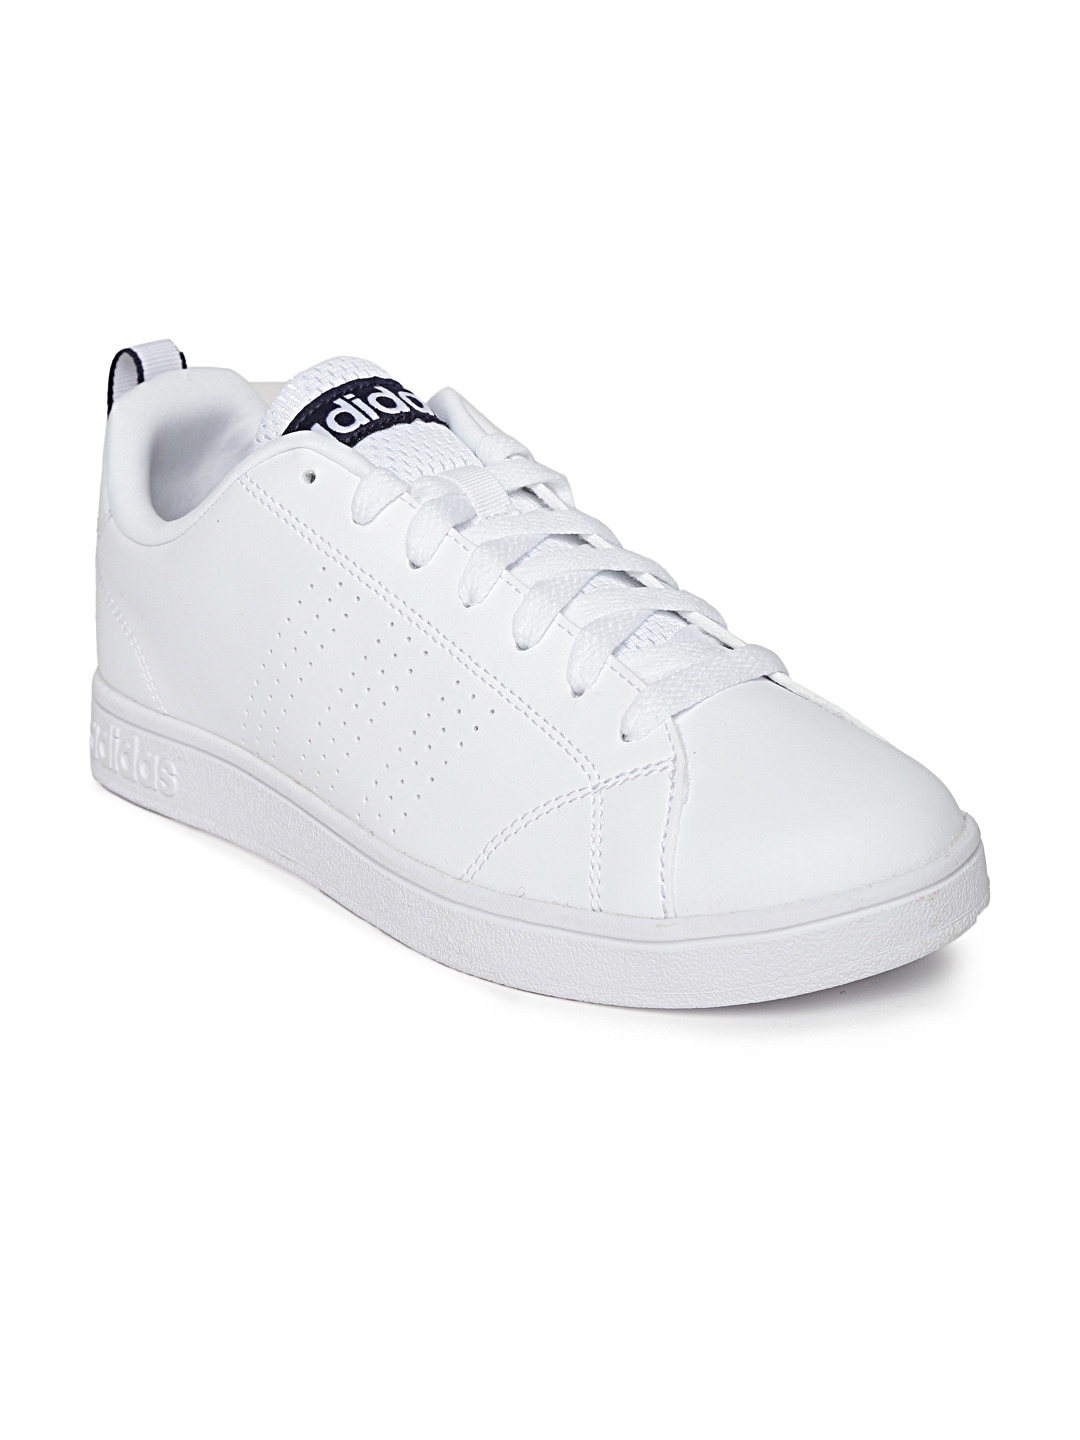 adidas neo shoes buy online